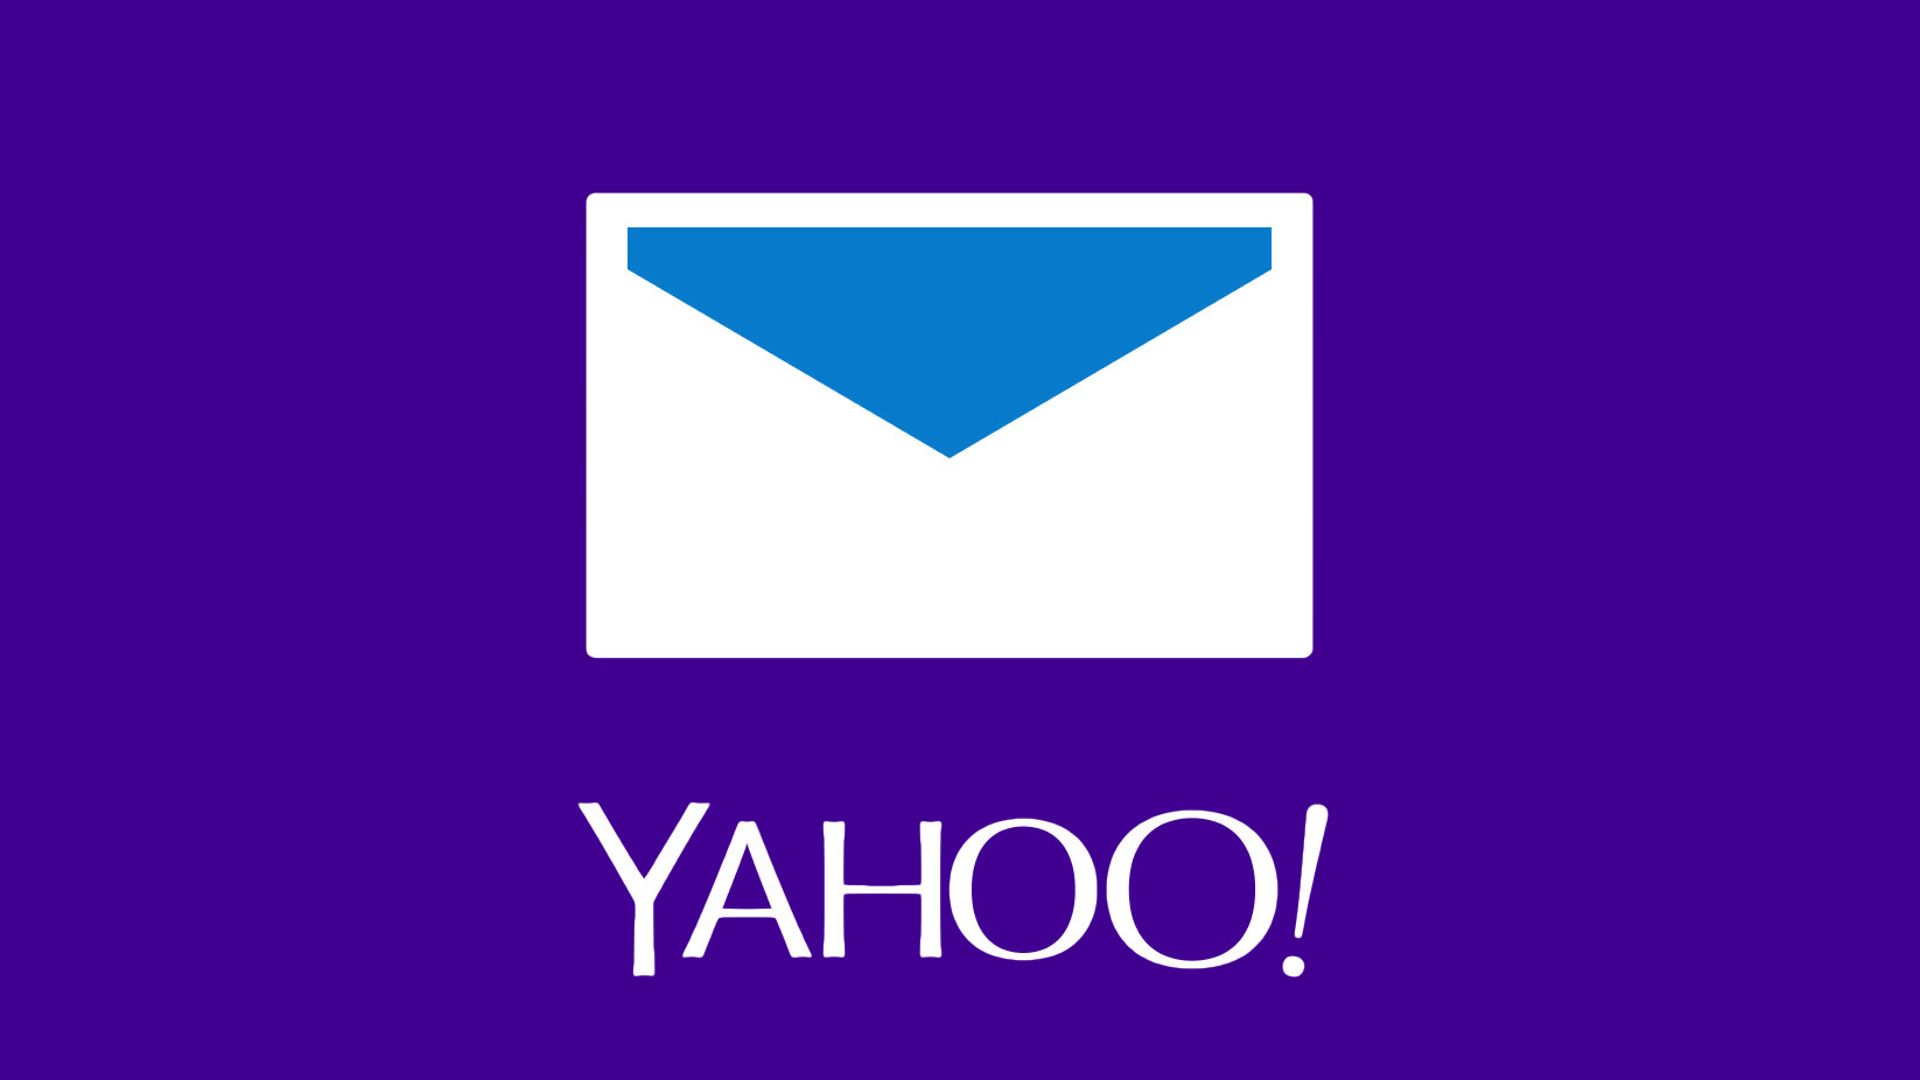 Yahoo! Mail on a purple background